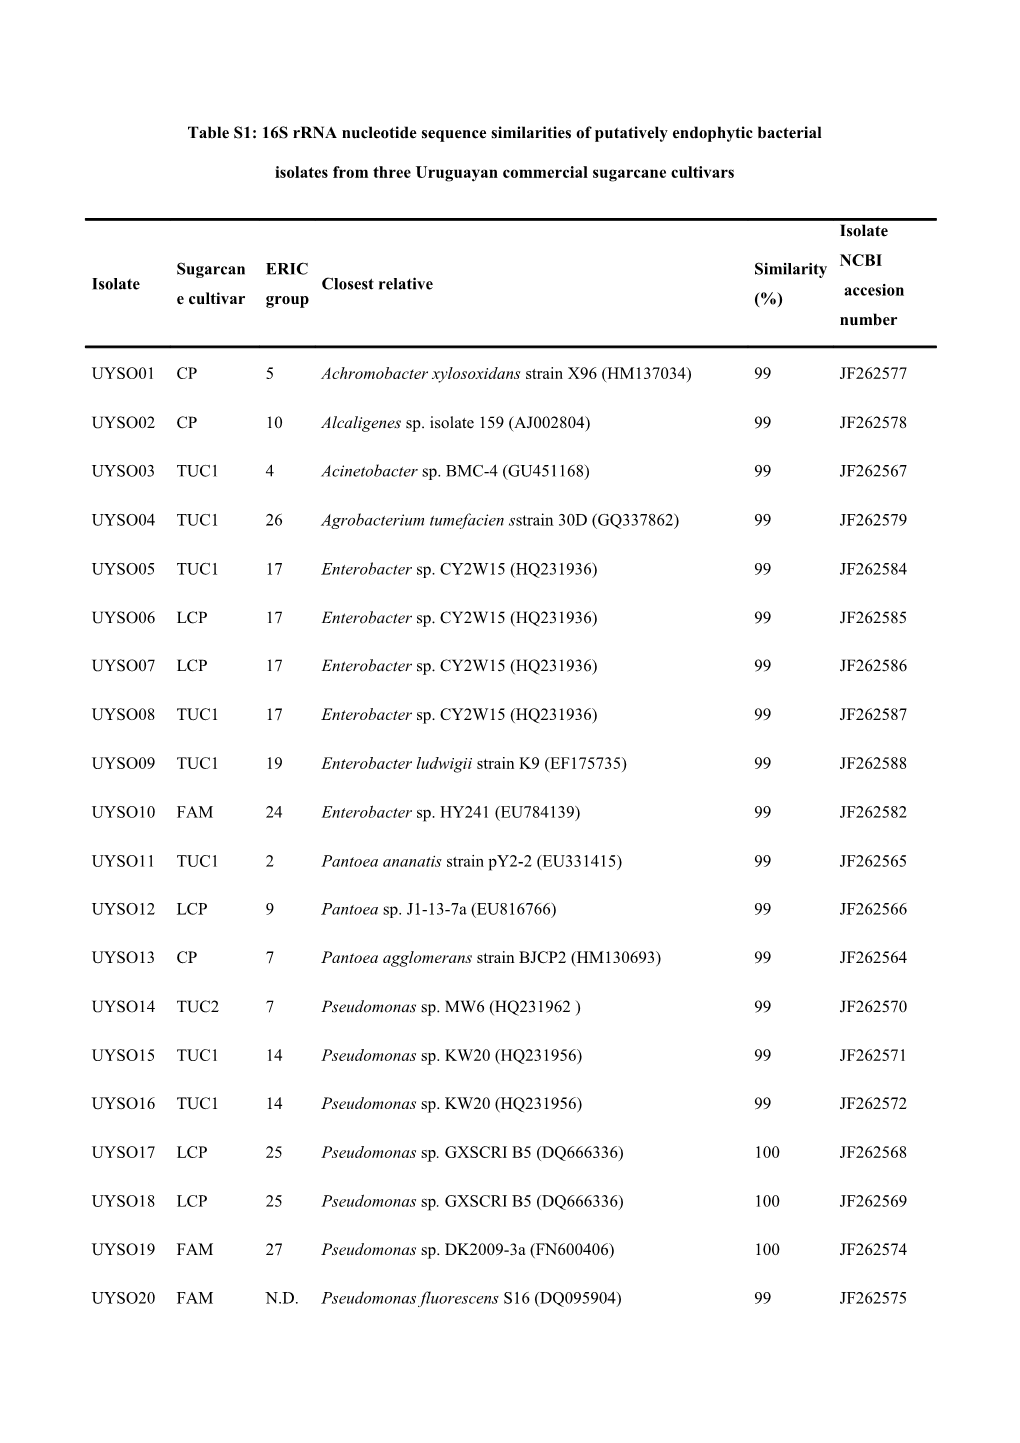 Table S1: 16S Rrna Nucleotide Sequence Similarities of Putatively Endophytic Bacterial